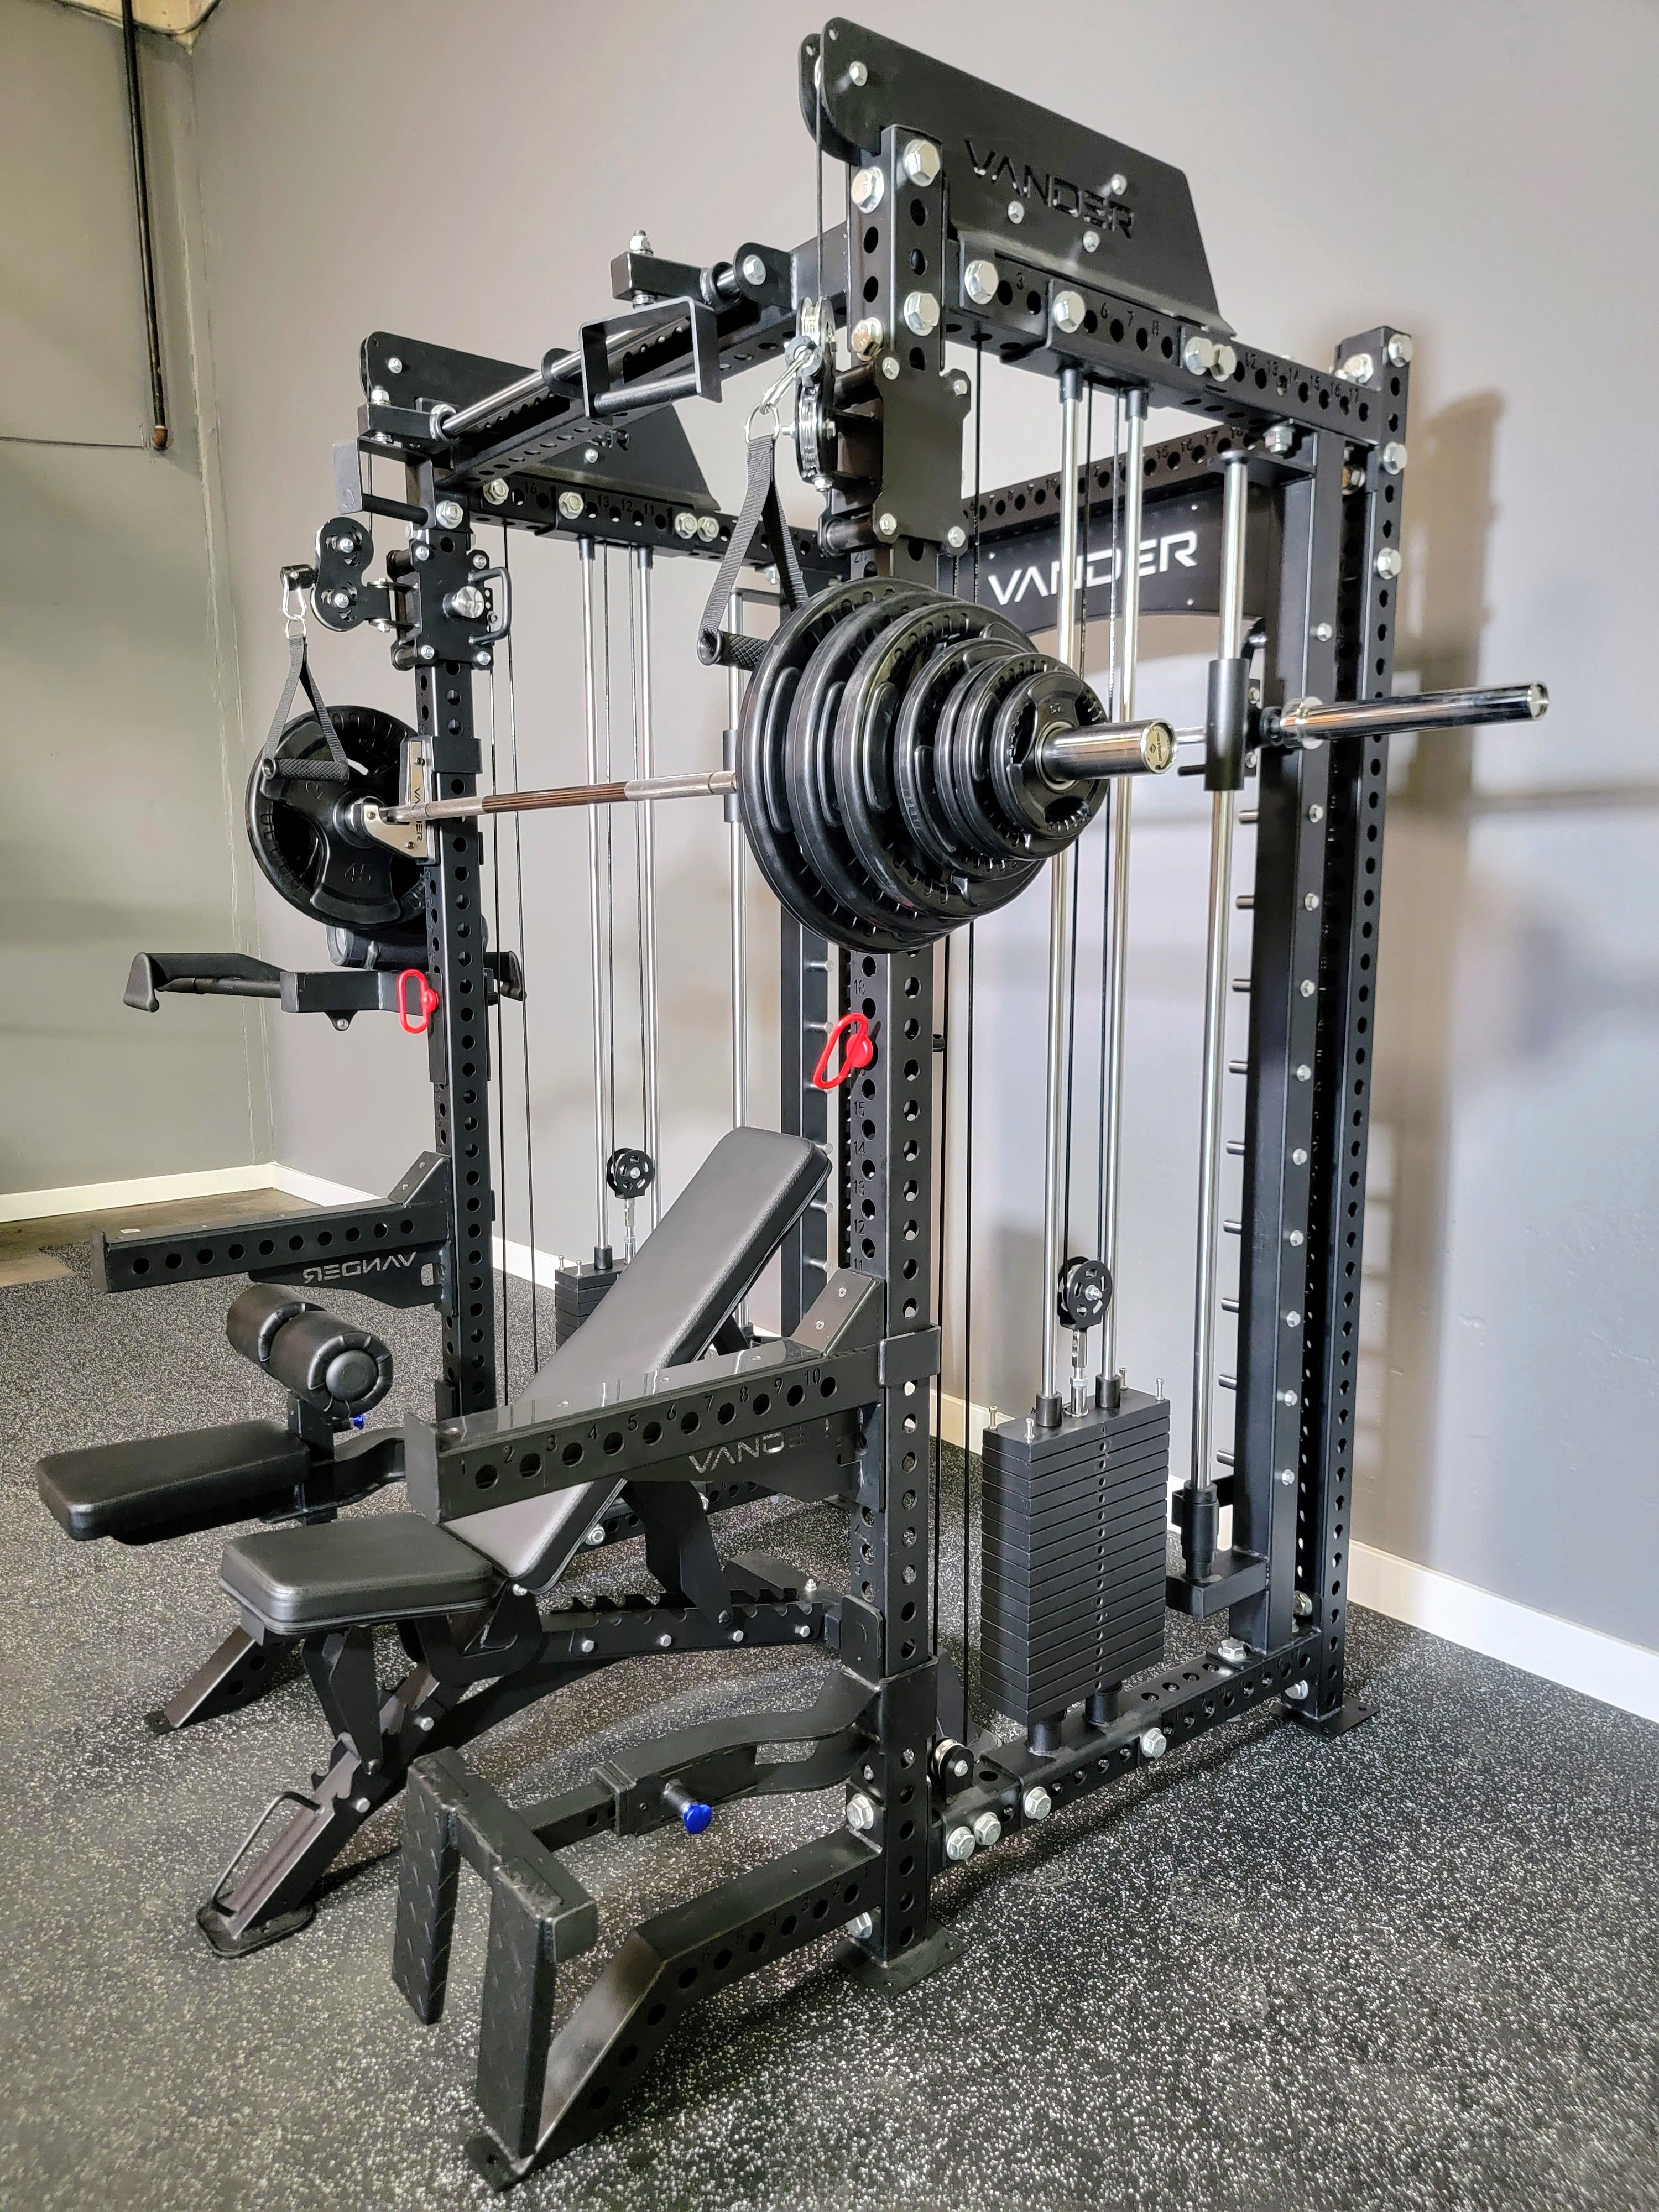 Vander USA FF91 Smith Machine & Functional Trainer – Mike's Fitness  Equipment